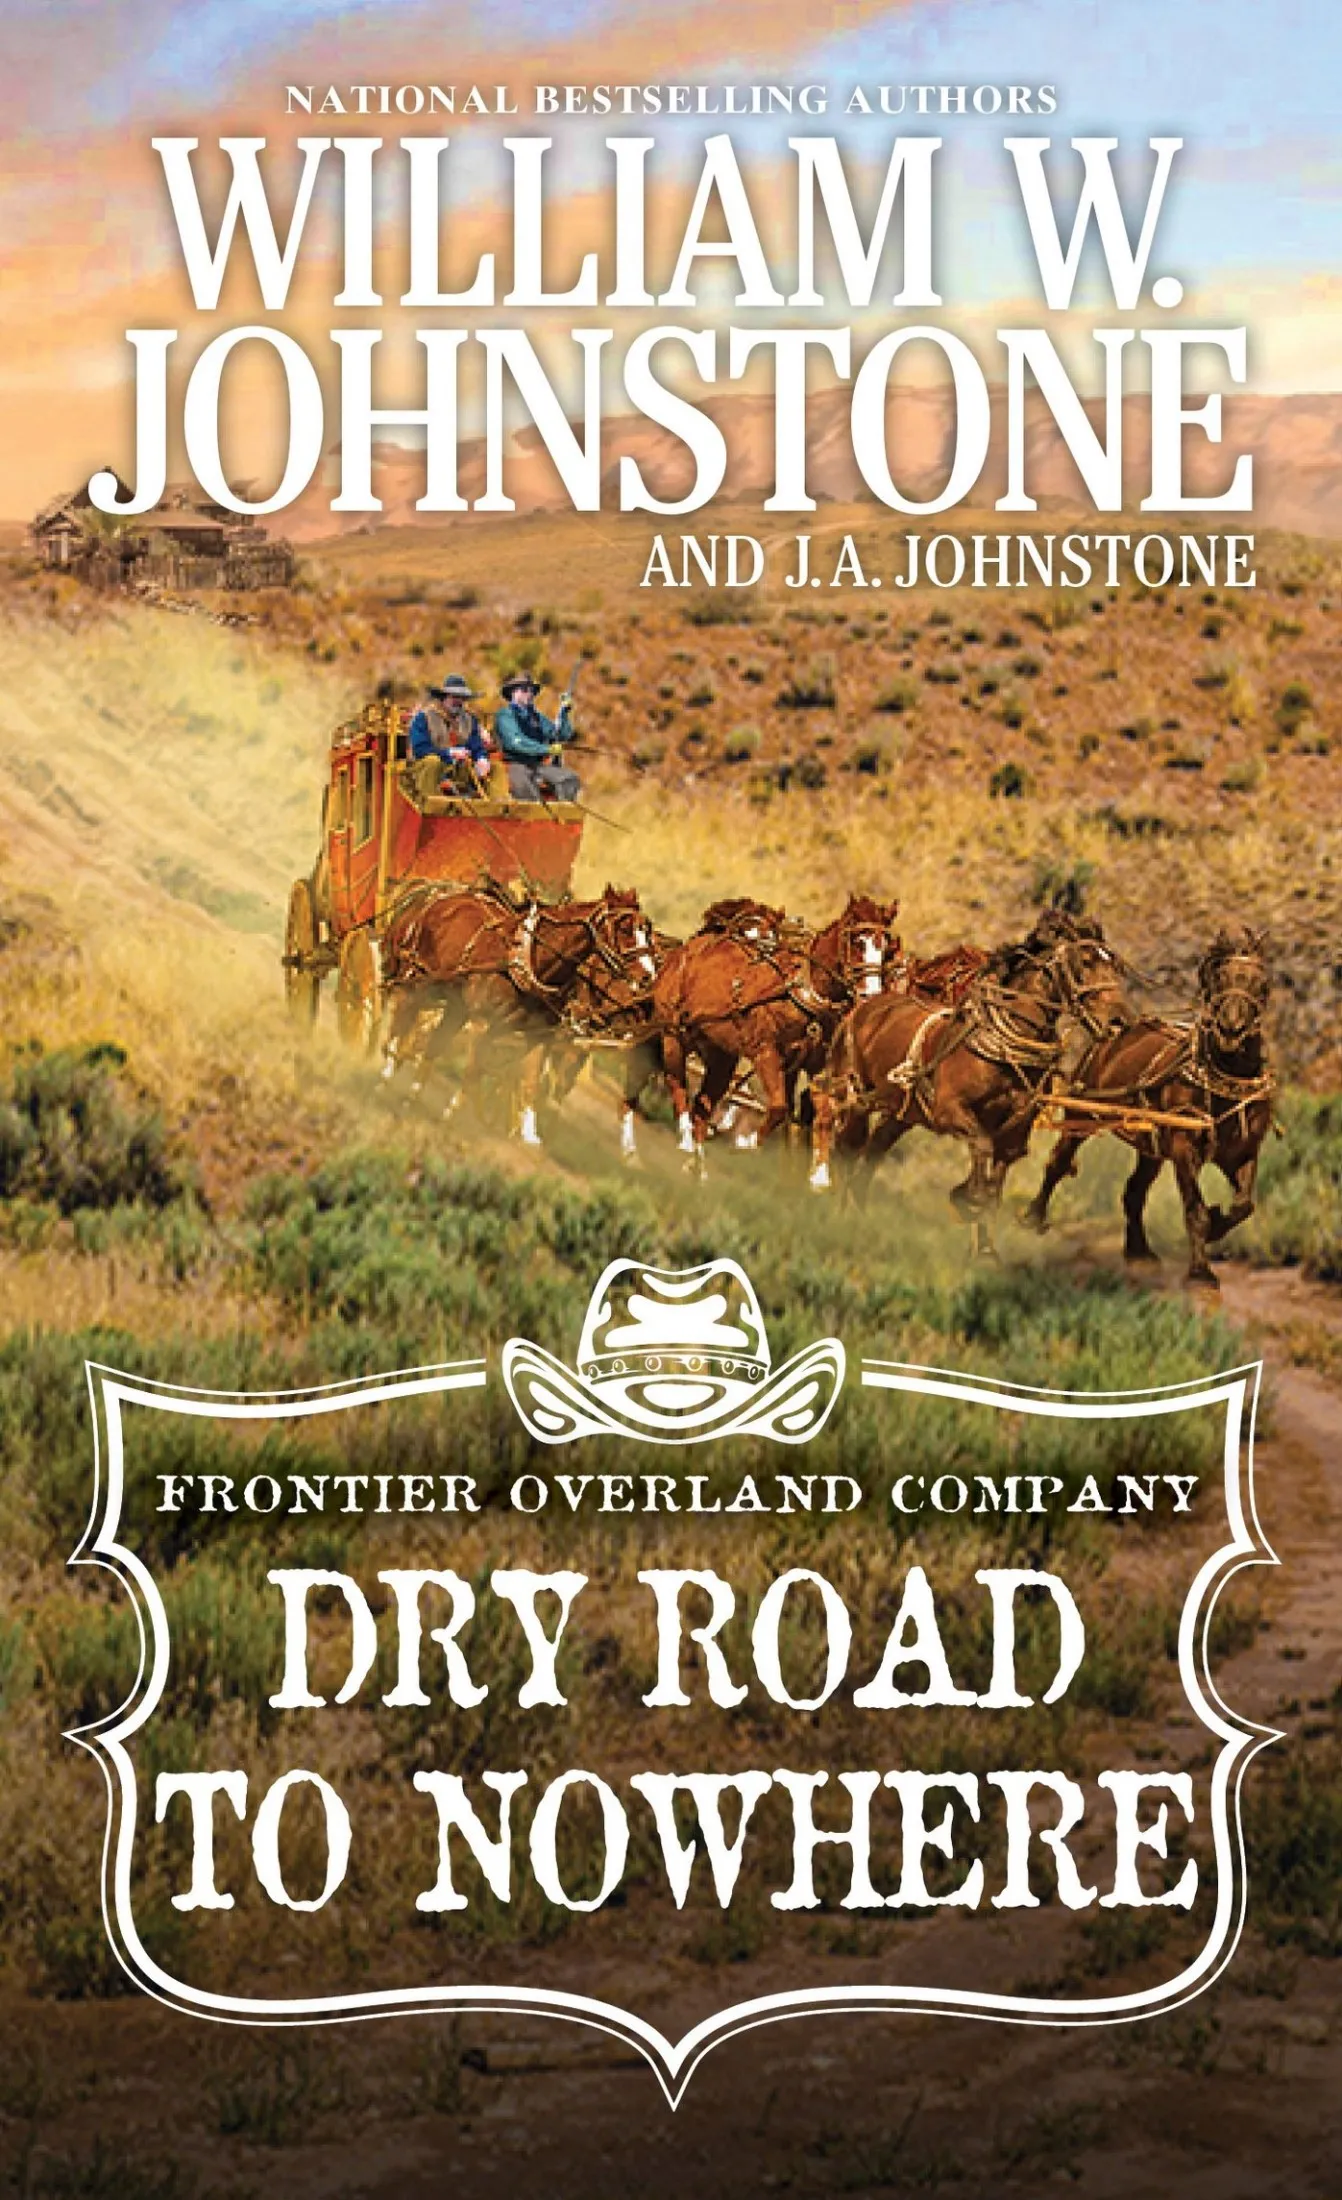 Dry Road to Nowhere (The Frontier Overland Company #2)